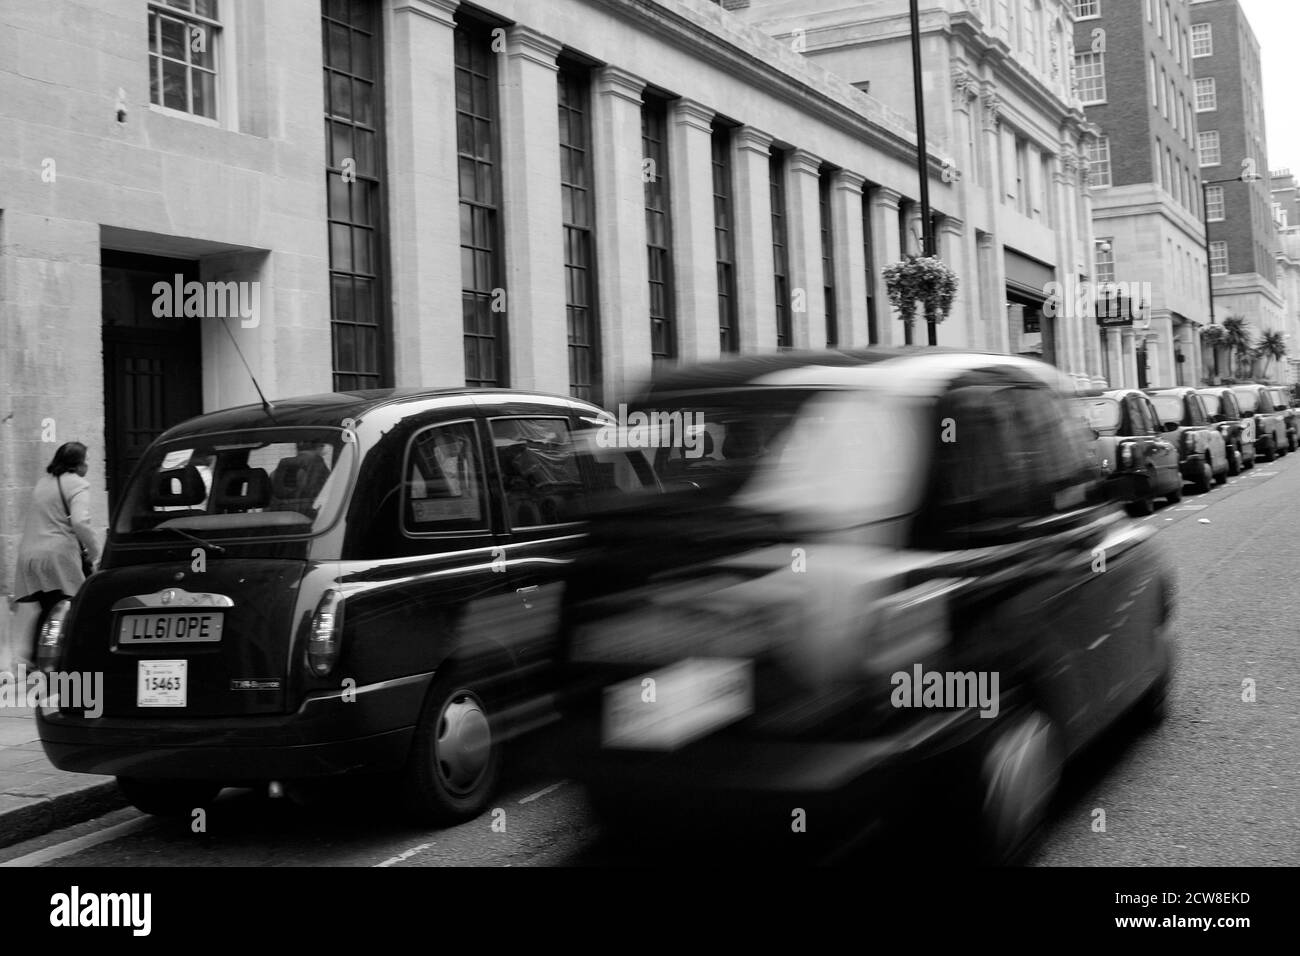 London, UK - May 5, 2012: TX4, London Taxi, also called hackney carriage, black cab. Traditionally Taxi cabs are all black in London but now produced Stock Photo